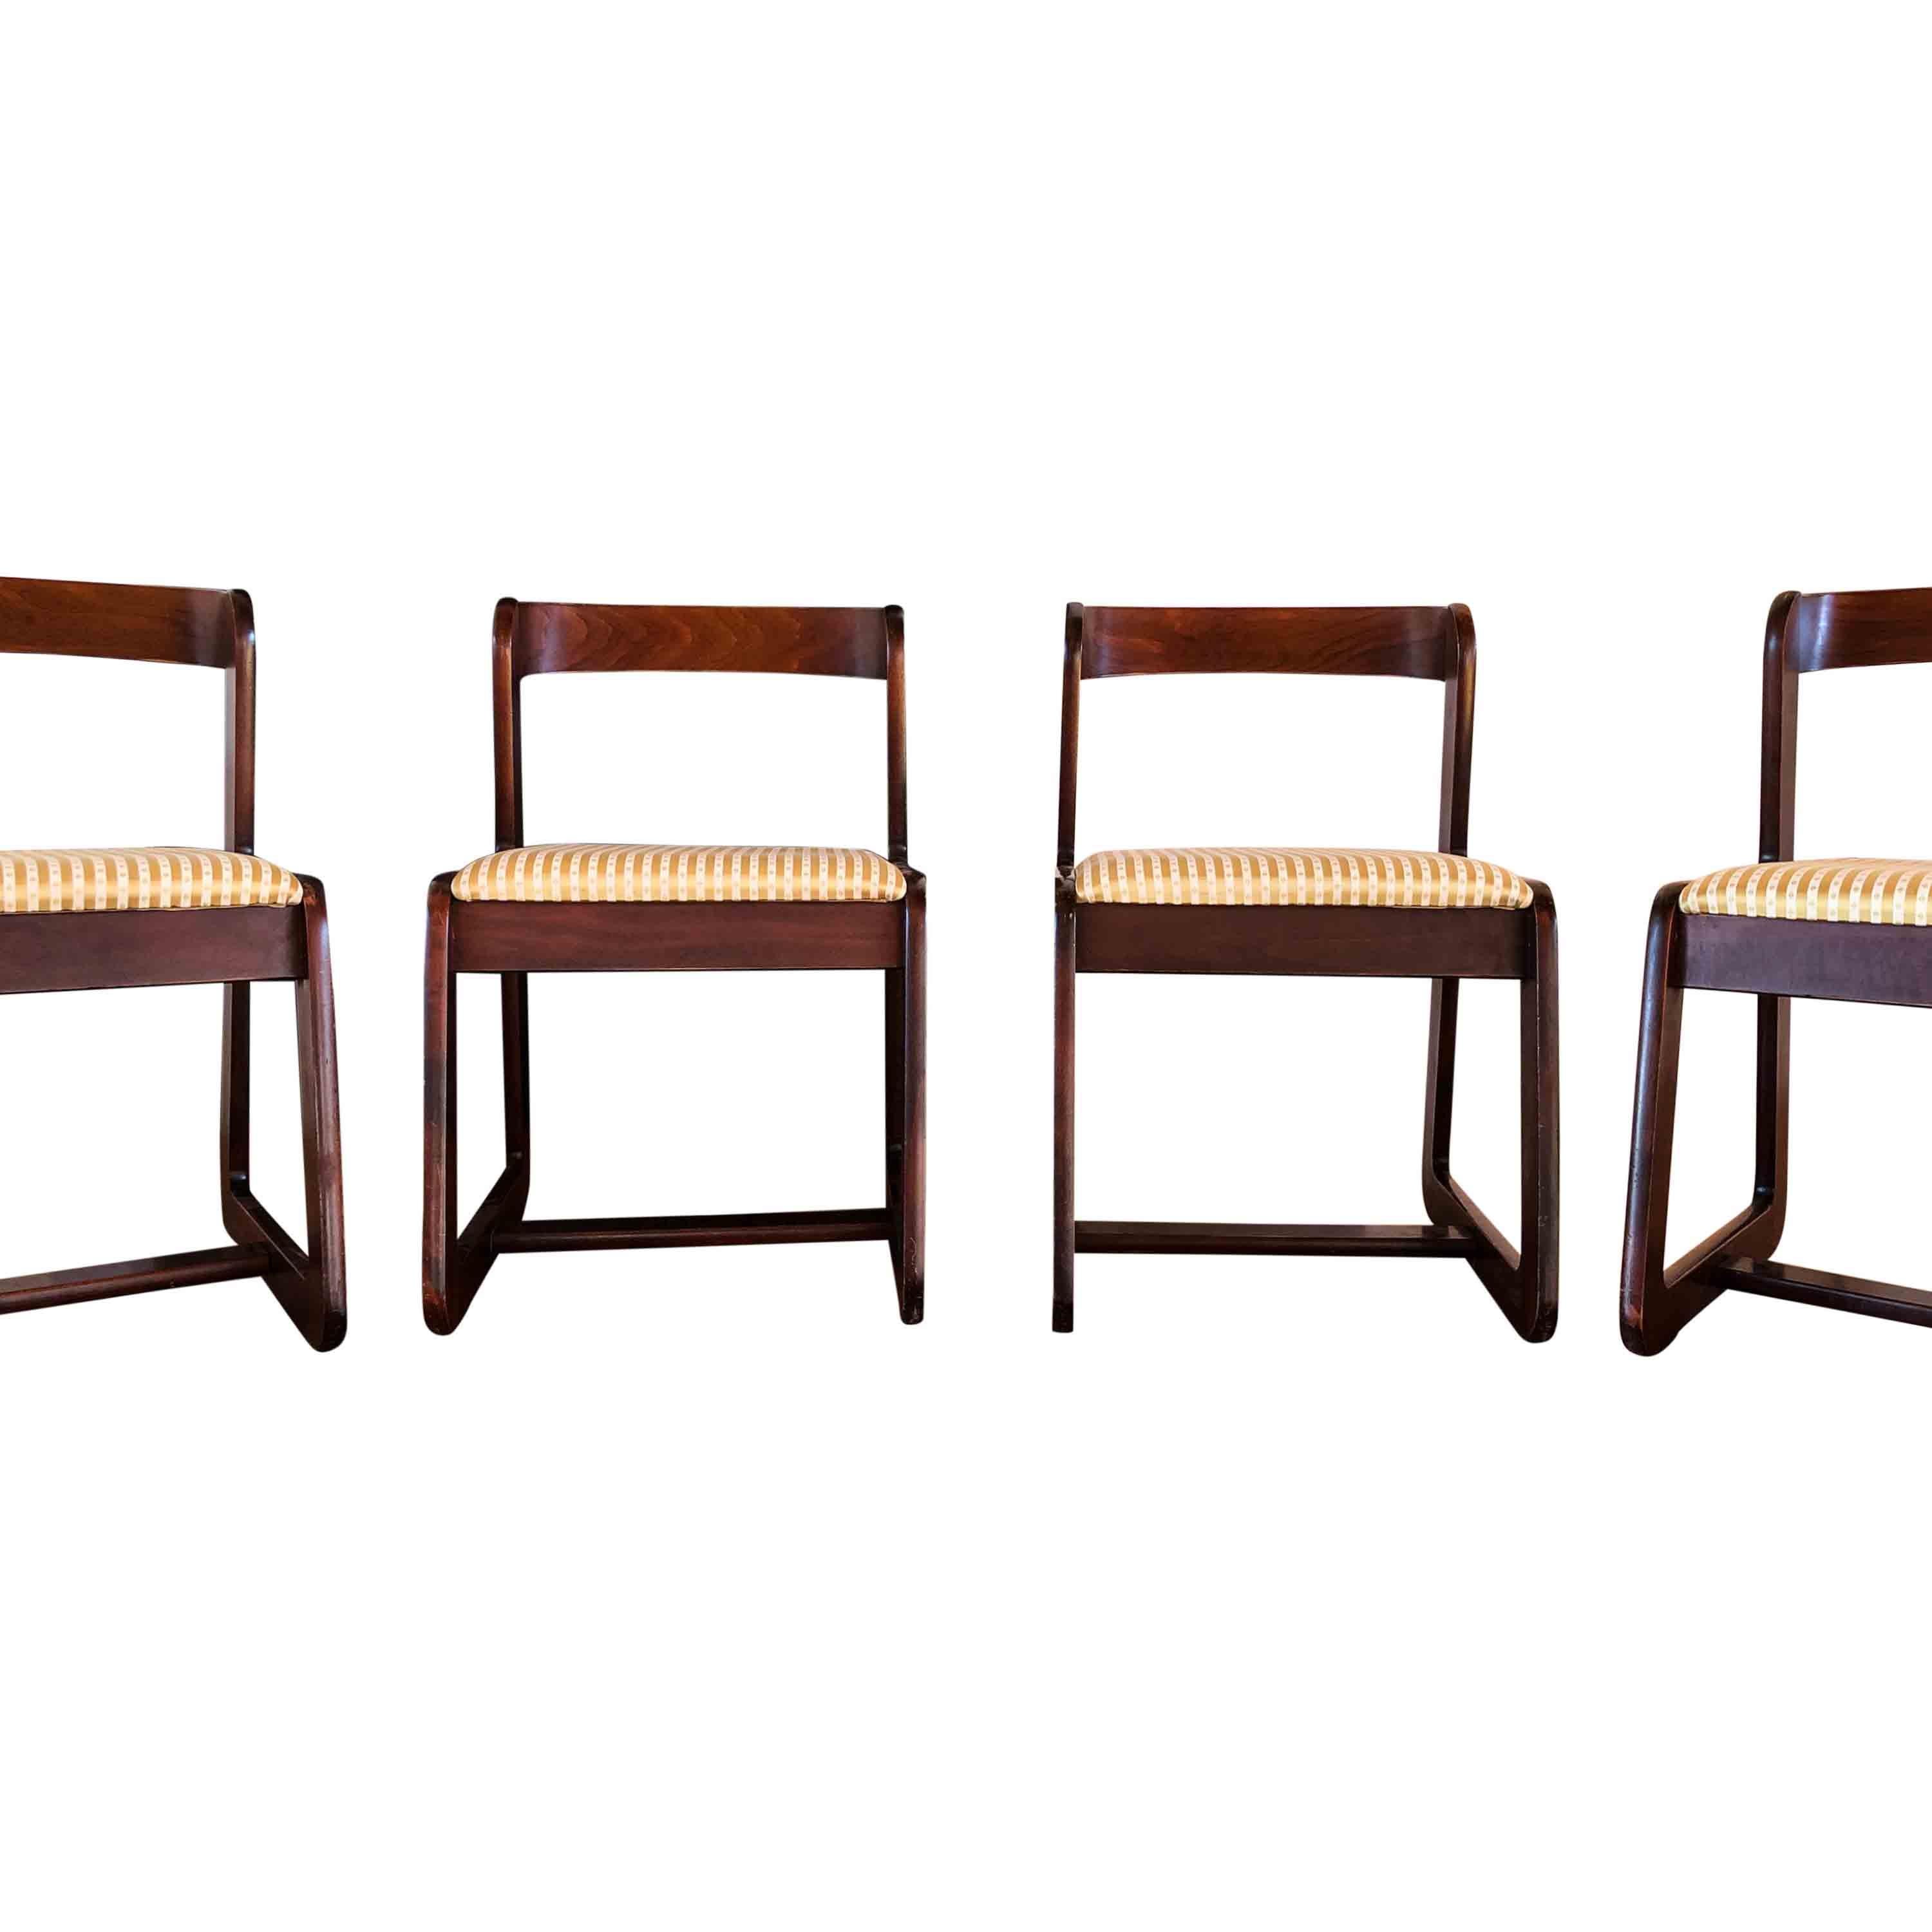 Midcentury Beech Dining Chairs by Willy Rizzo for Mario Sabot, 70s, Set of 6 For Sale 2